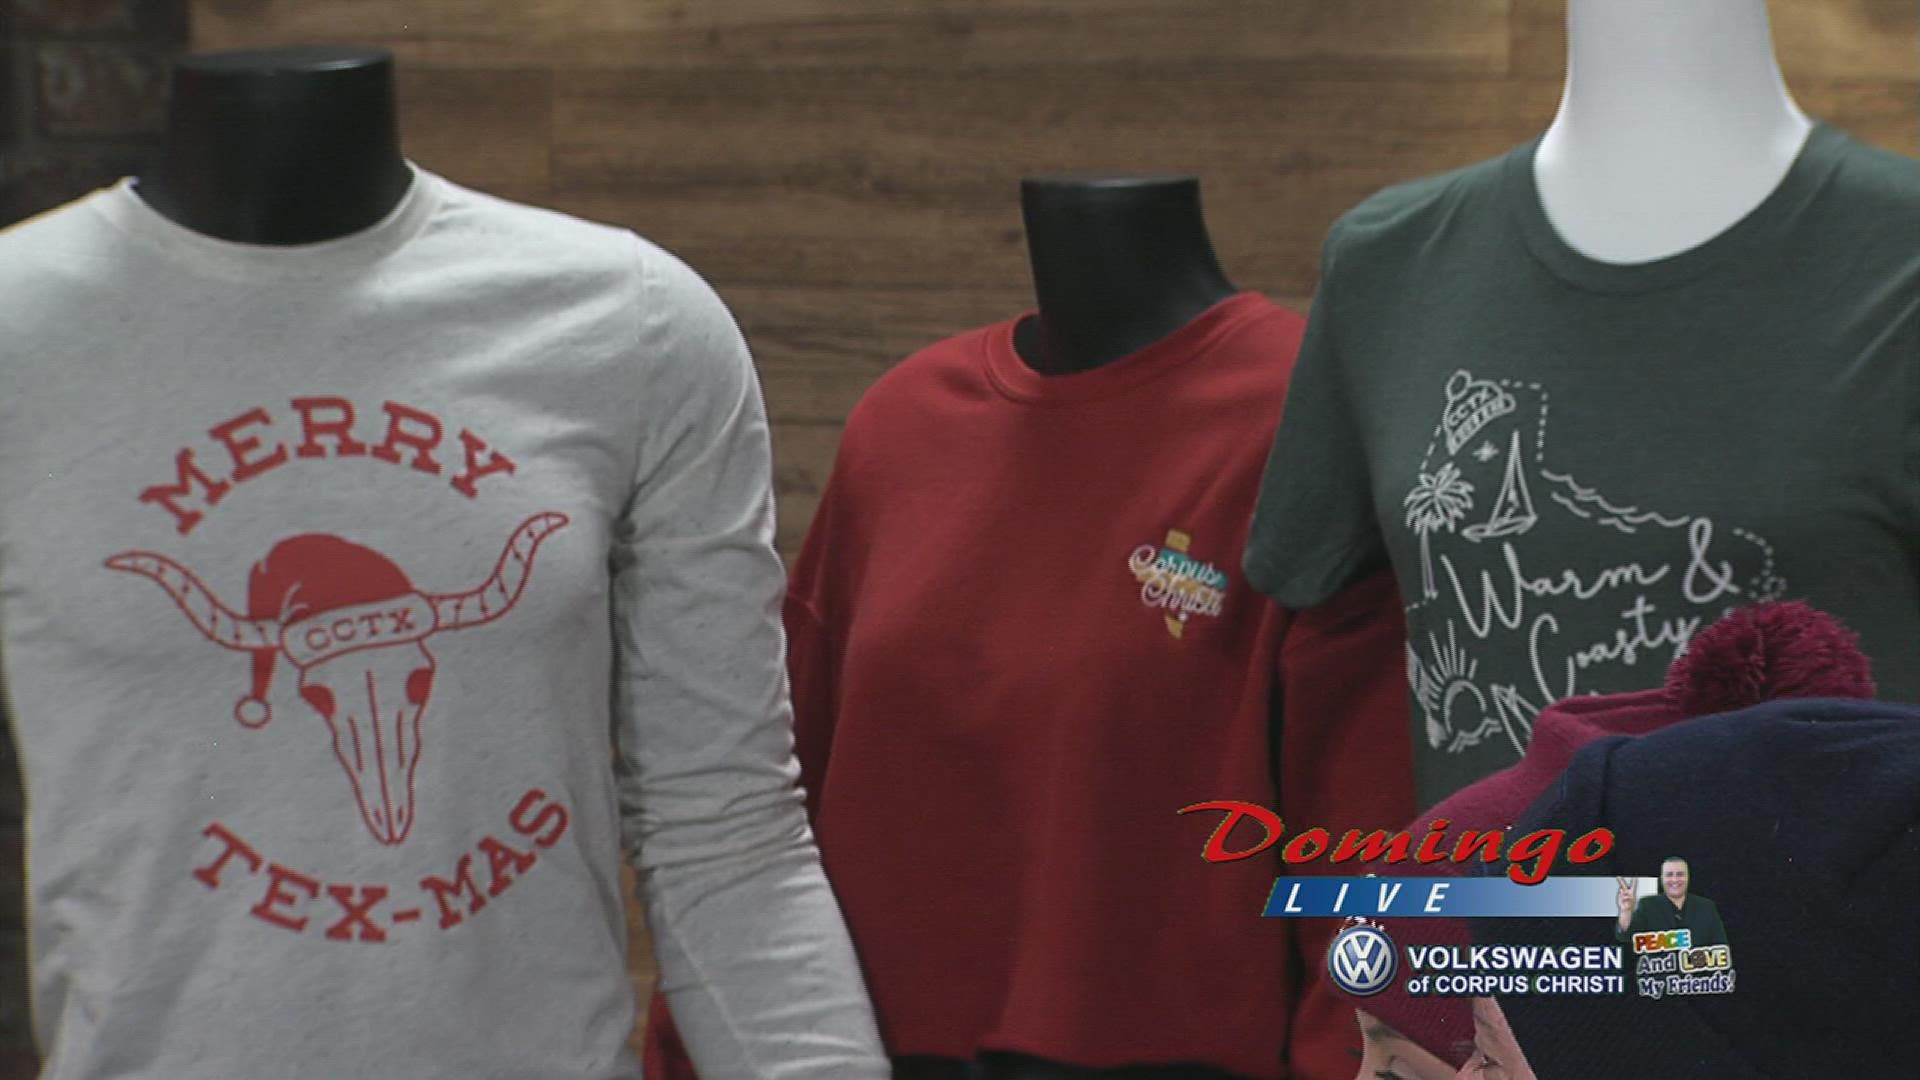 America and Stephen from Visit Corpus Christi joined us live to give us a sneak peek of their new line of holiday gear, clothes and decorations.